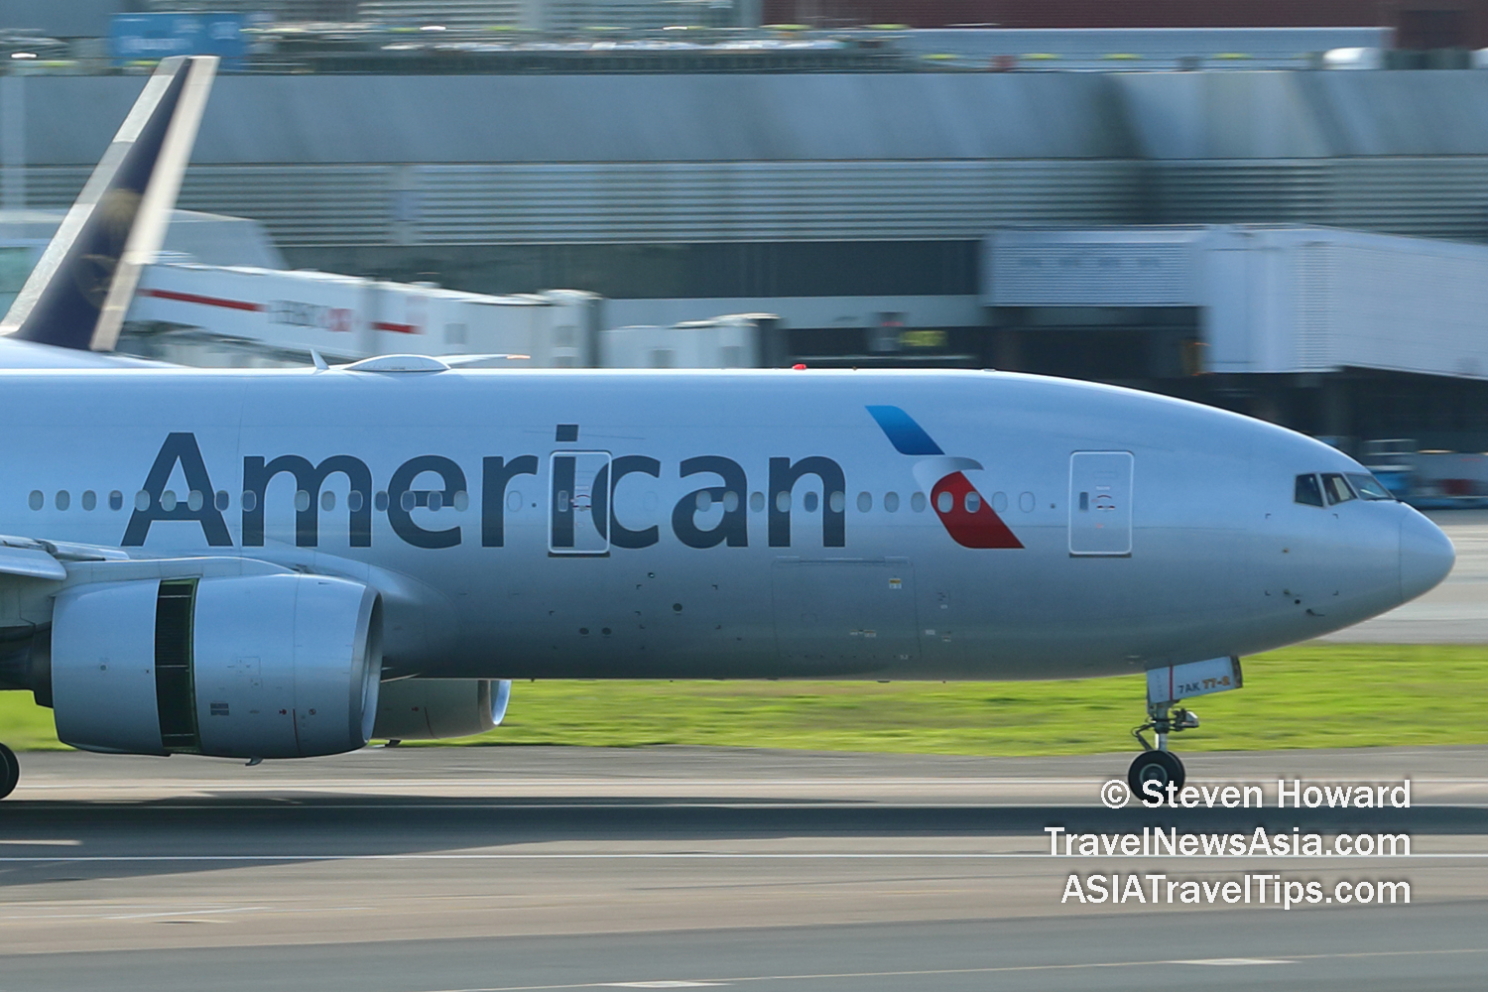 American Airlines B777 reg: N779AN. Picture by Steven Howard of TravelNewsAsia.com Click to enlarge.